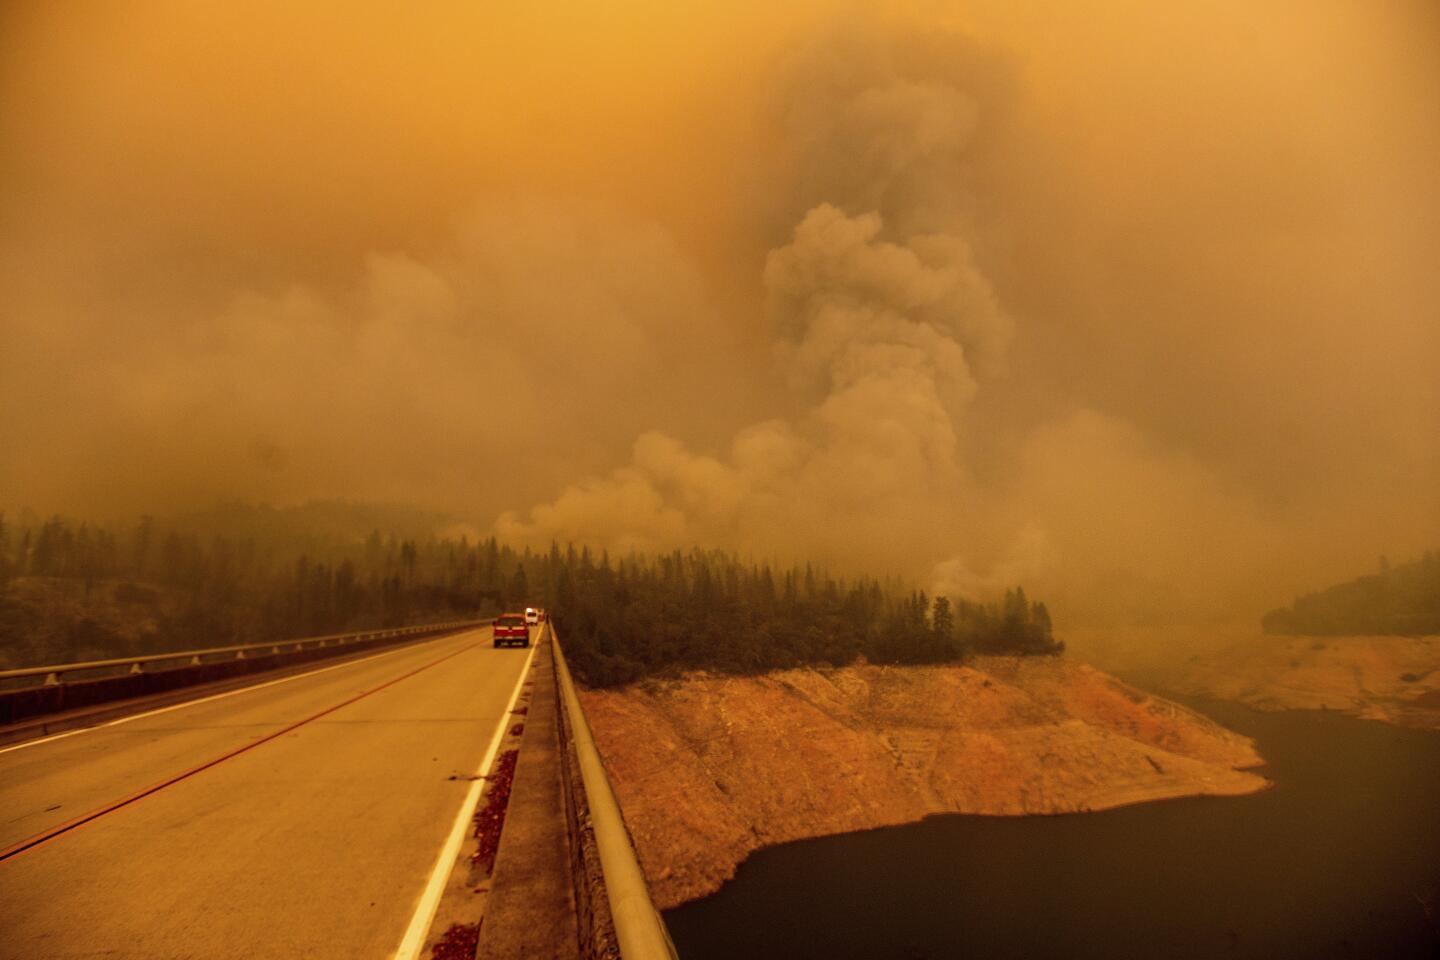 A plume rises from the Bear fire as it burns along Lake Oroville in Butte County